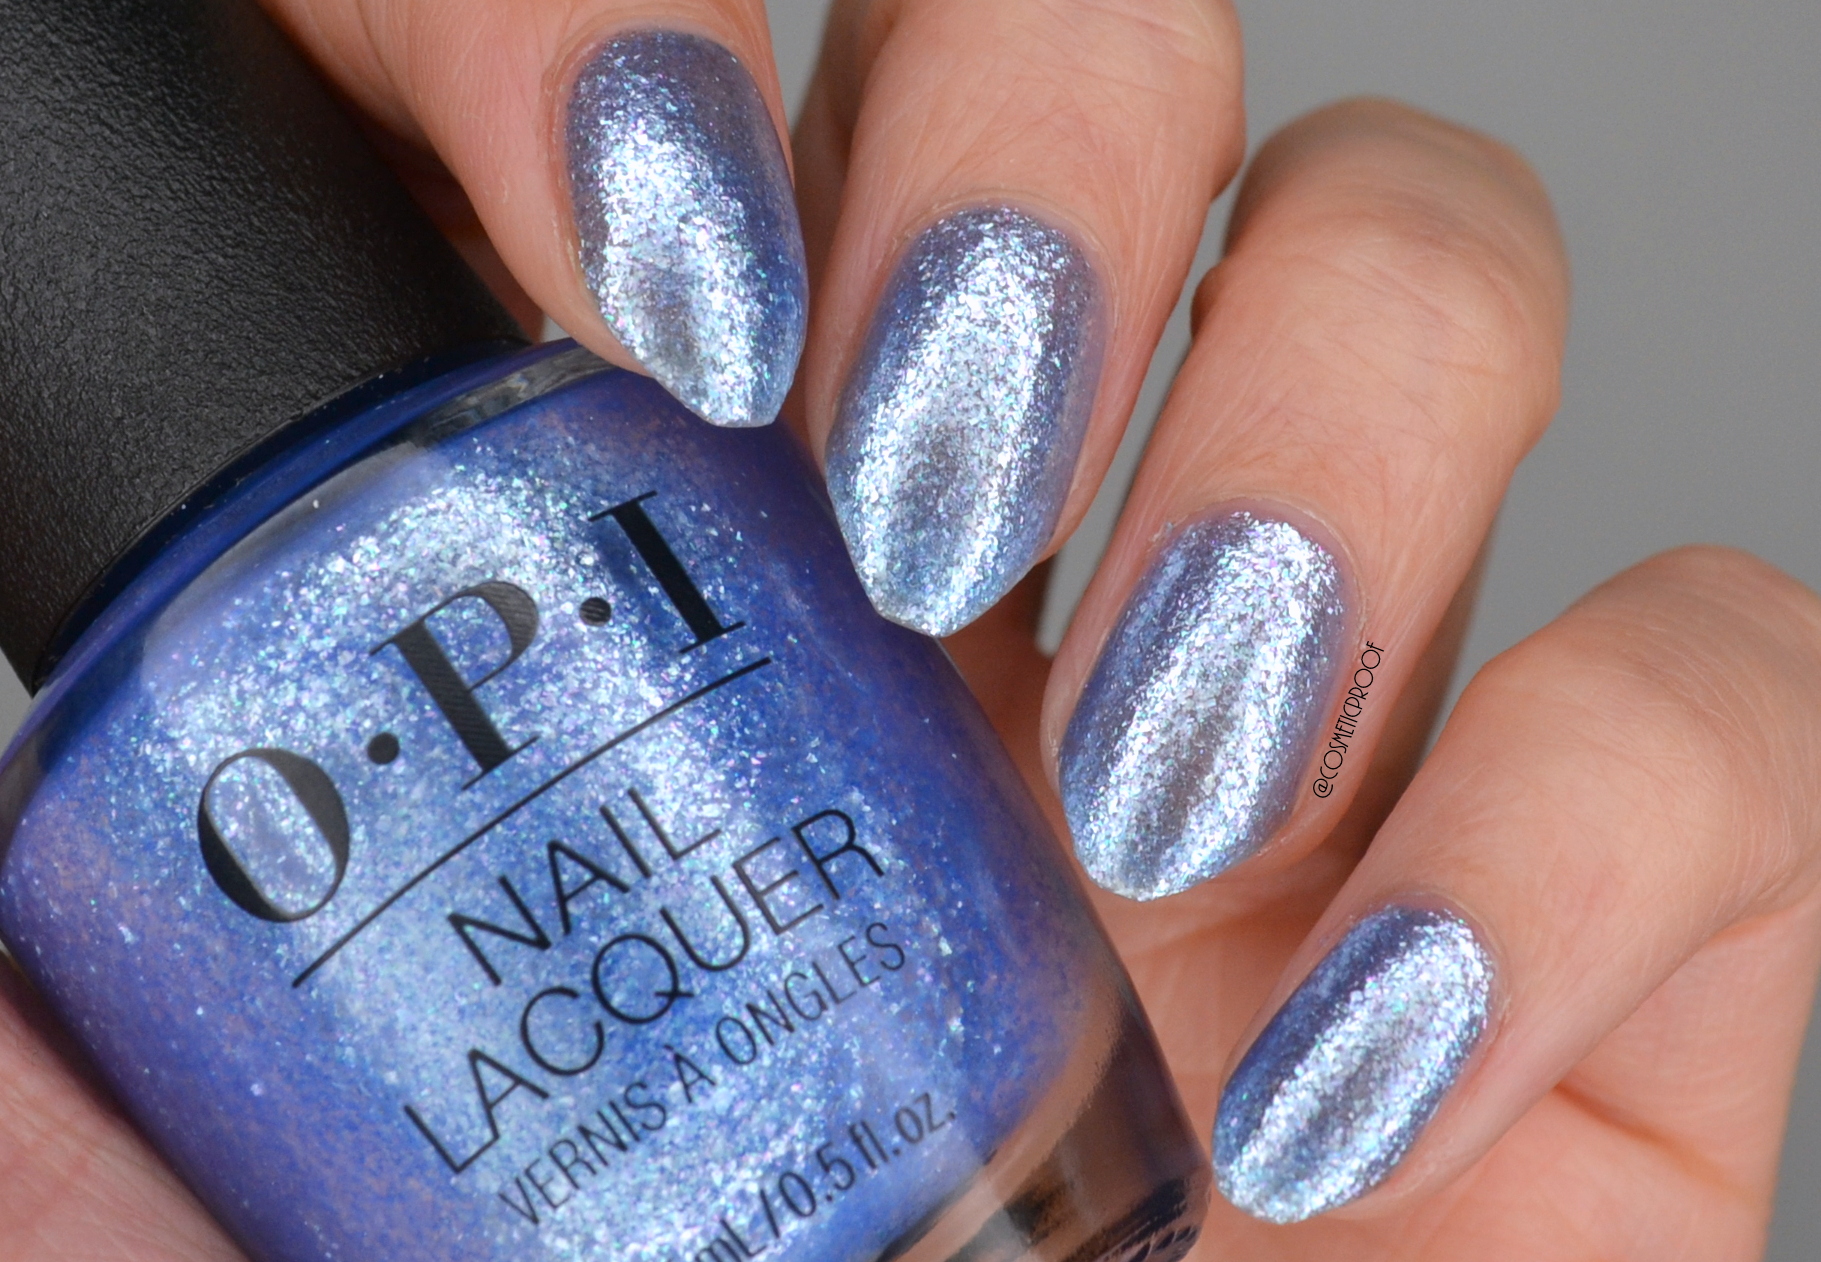 NAILS | OPI "The Pearl of Dreams" Swatch #CBBxManiMonday | Cosmetic Proof | Vancouver beauty, art and lifestyle blog